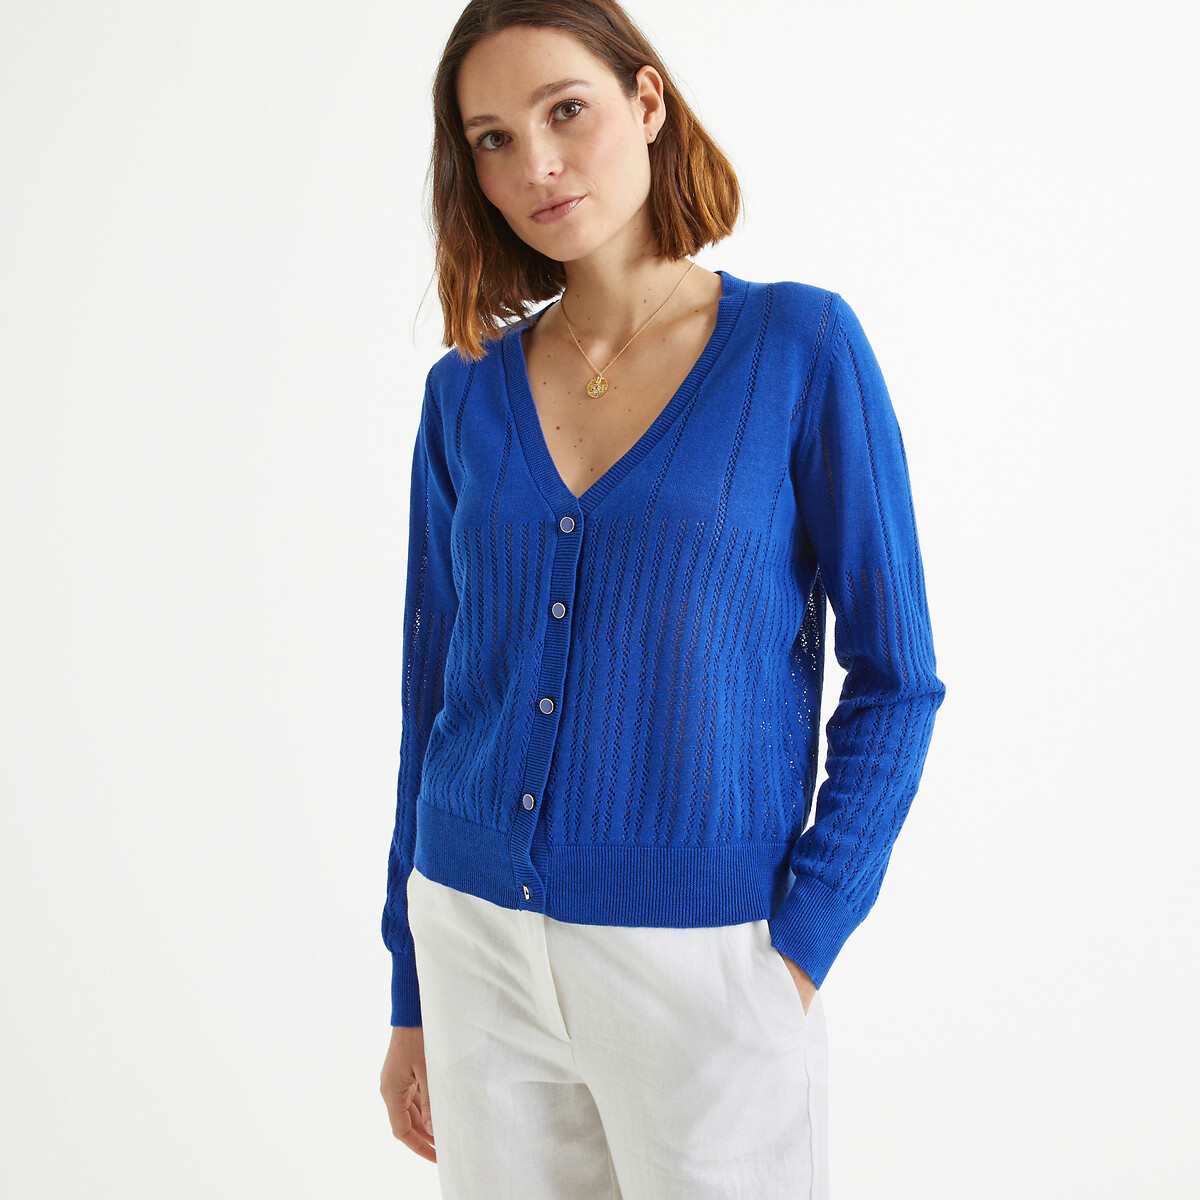 Image of Linen/Cotton Buttoned Cardigan with V-Neck